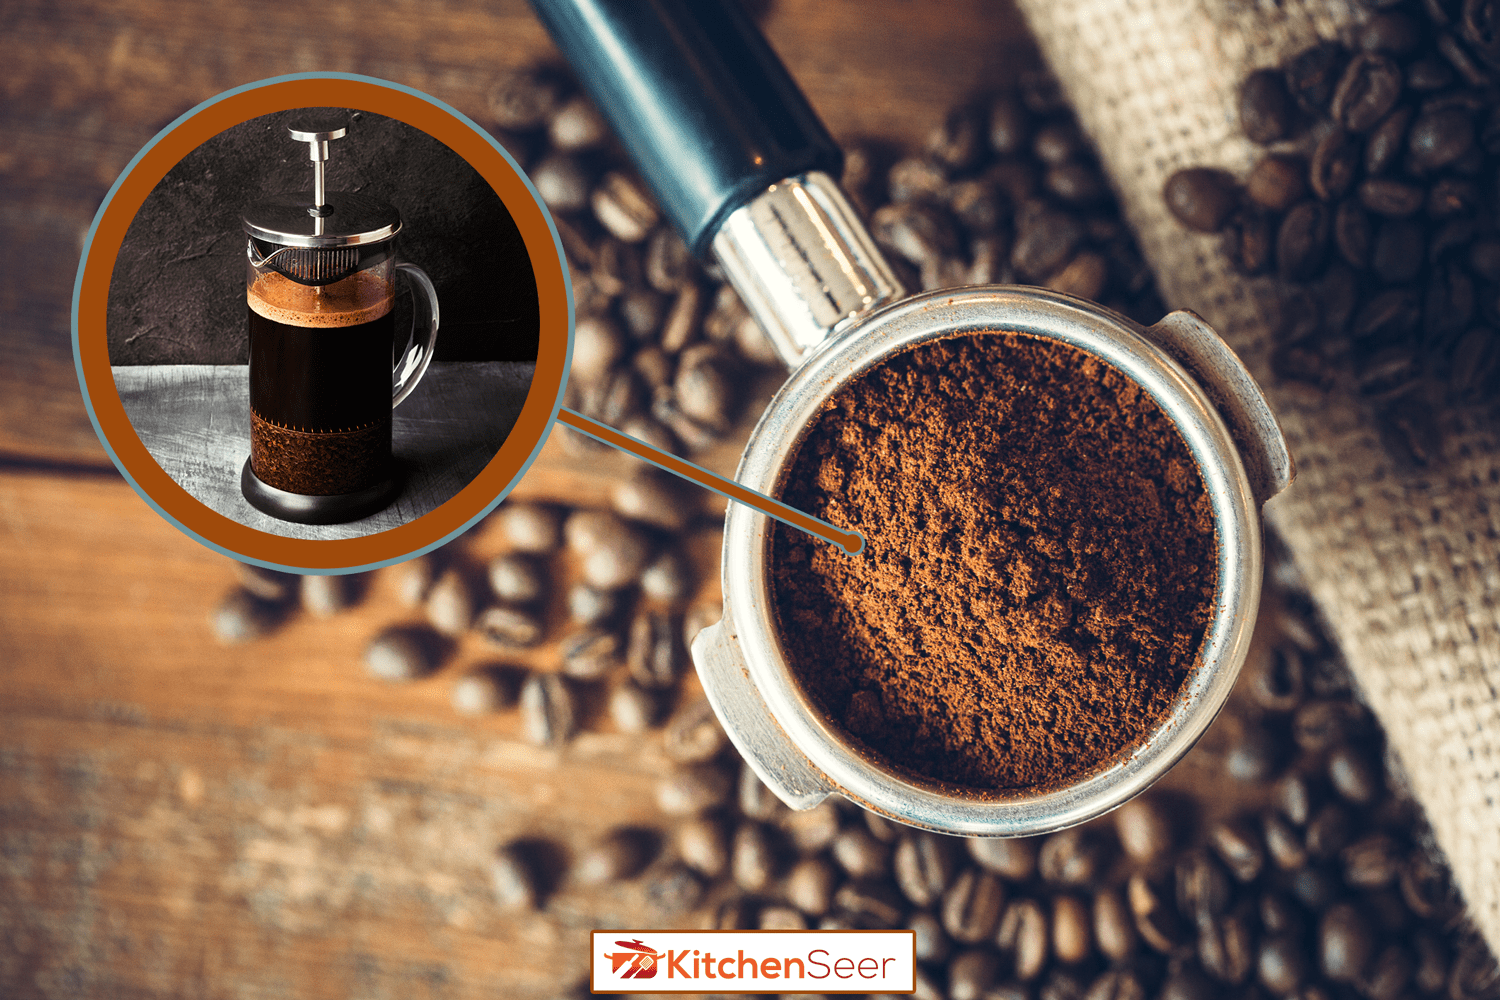 Freshly ground espresso in a portafilter, ready to be made into a hot shot of espresso. Rustic wood background, a burlap coffee bag in the background covered with roasted coffee beans. Overhead view. - How To Dispose Of Coffee Grounds From French Press